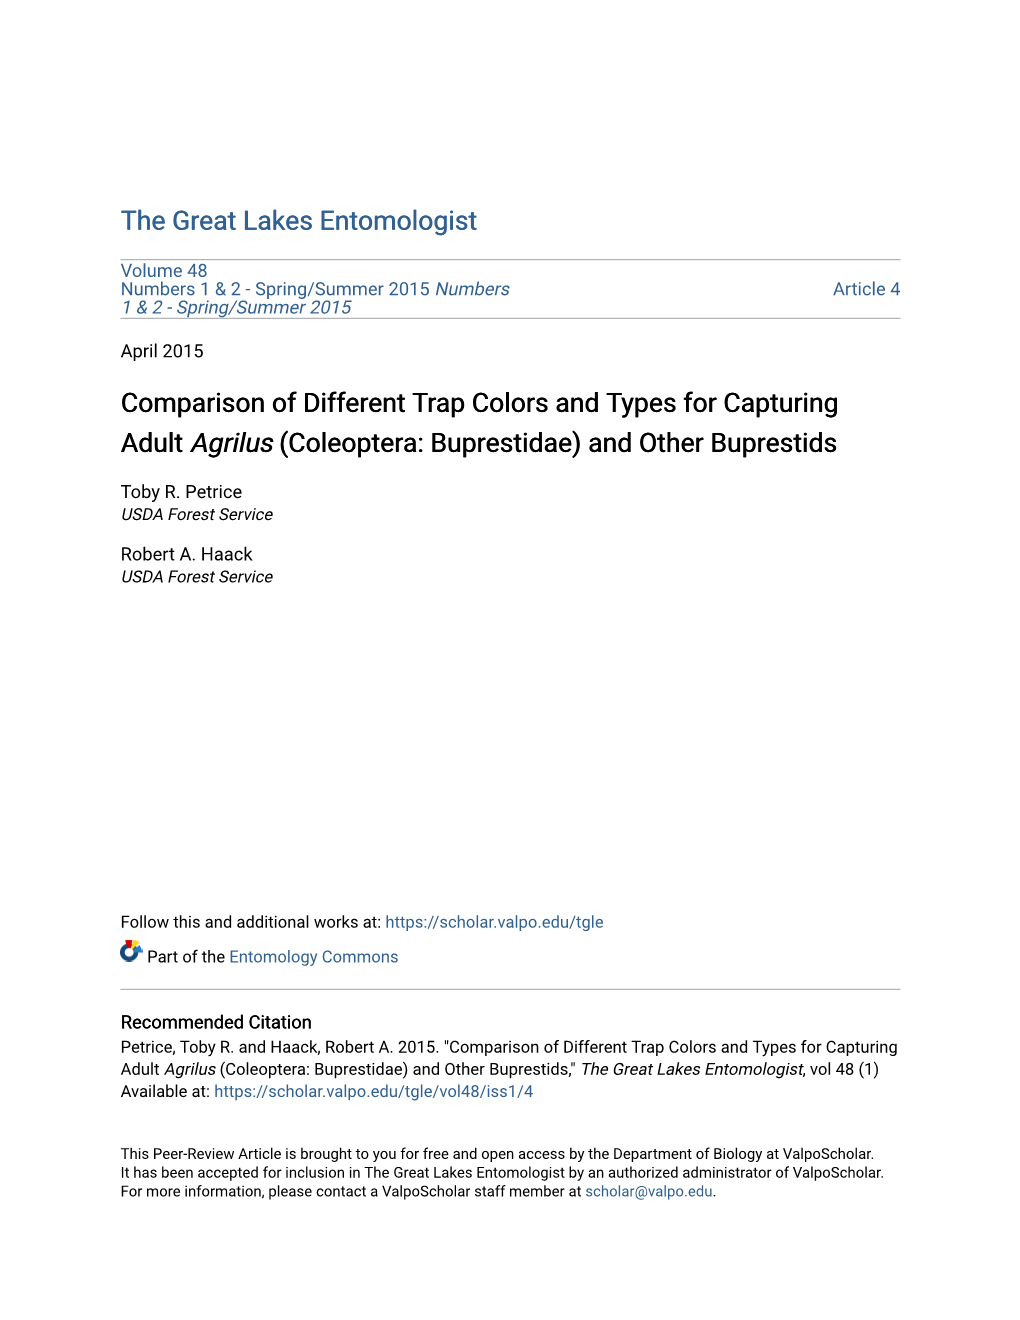 Comparison of Different Trap Colors and Types for Capturing Adult Agrilus (Coleoptera: Buprestidae) and Other Buprestids